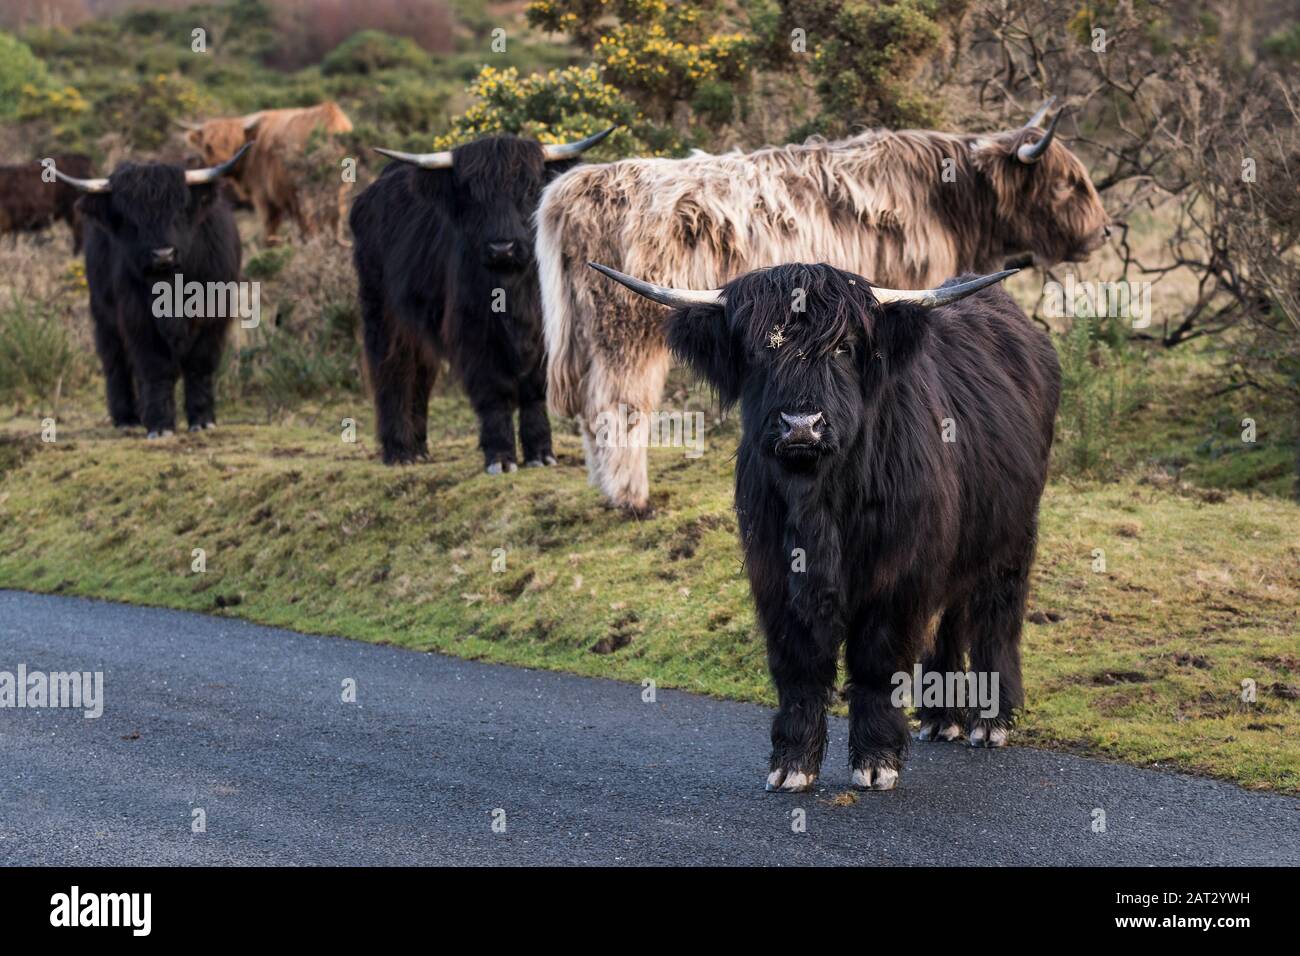 Highland Cattle wandering on the Road on Goonzion Downs in Cornwall. Stockfoto